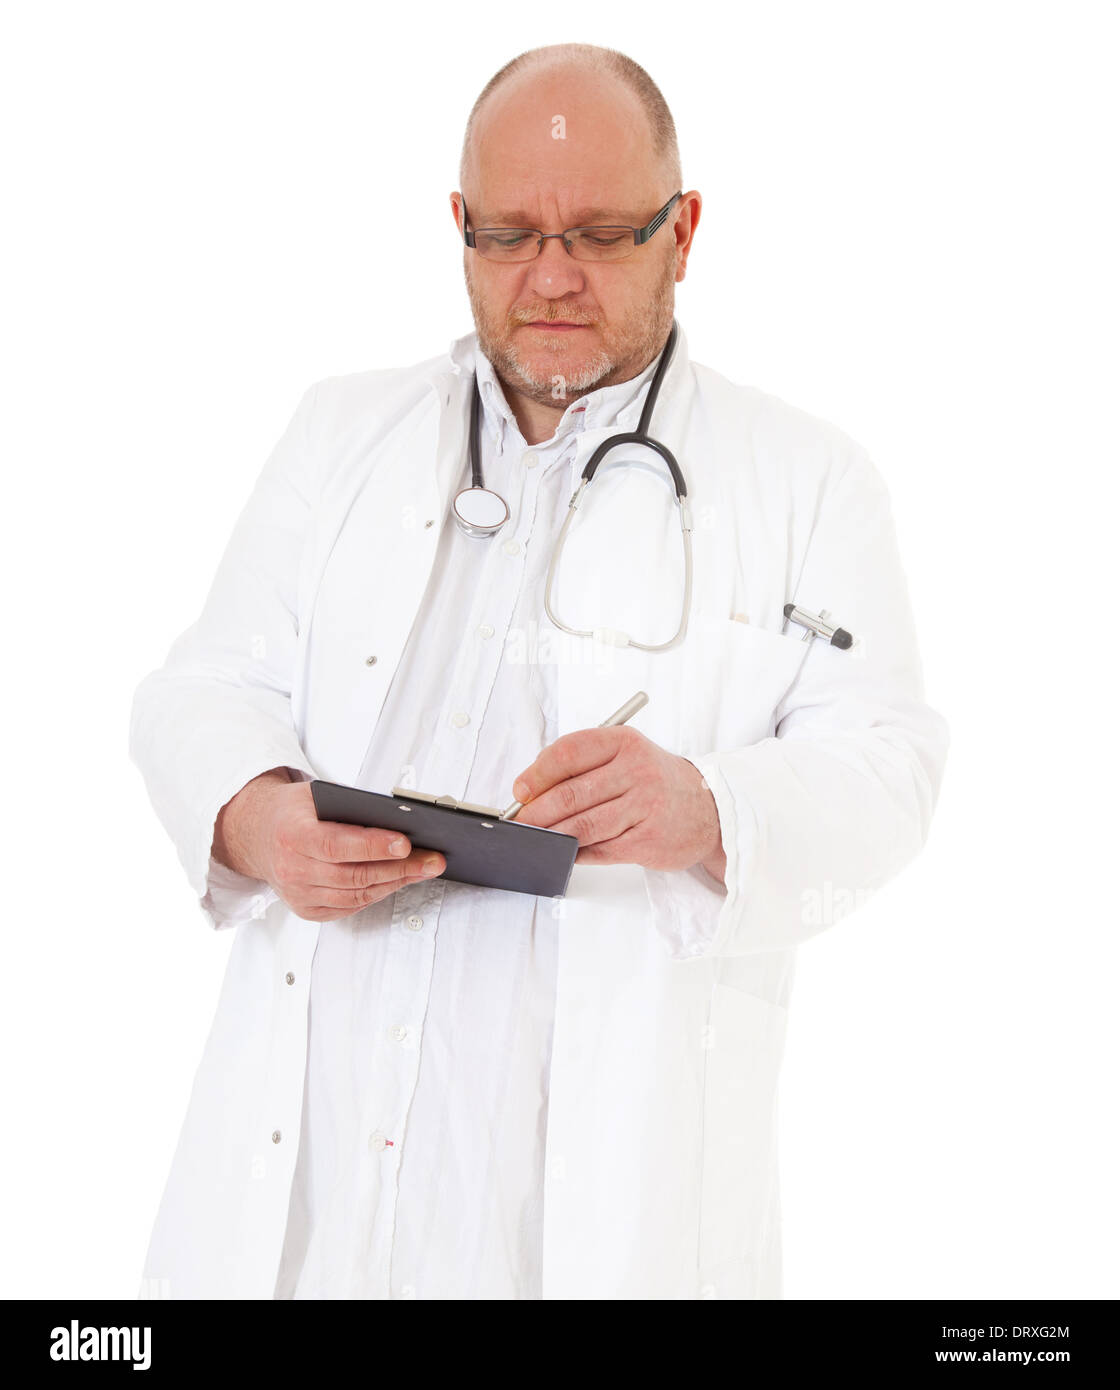 Chief resident writing on clipboard. All on white background. Stock Photo